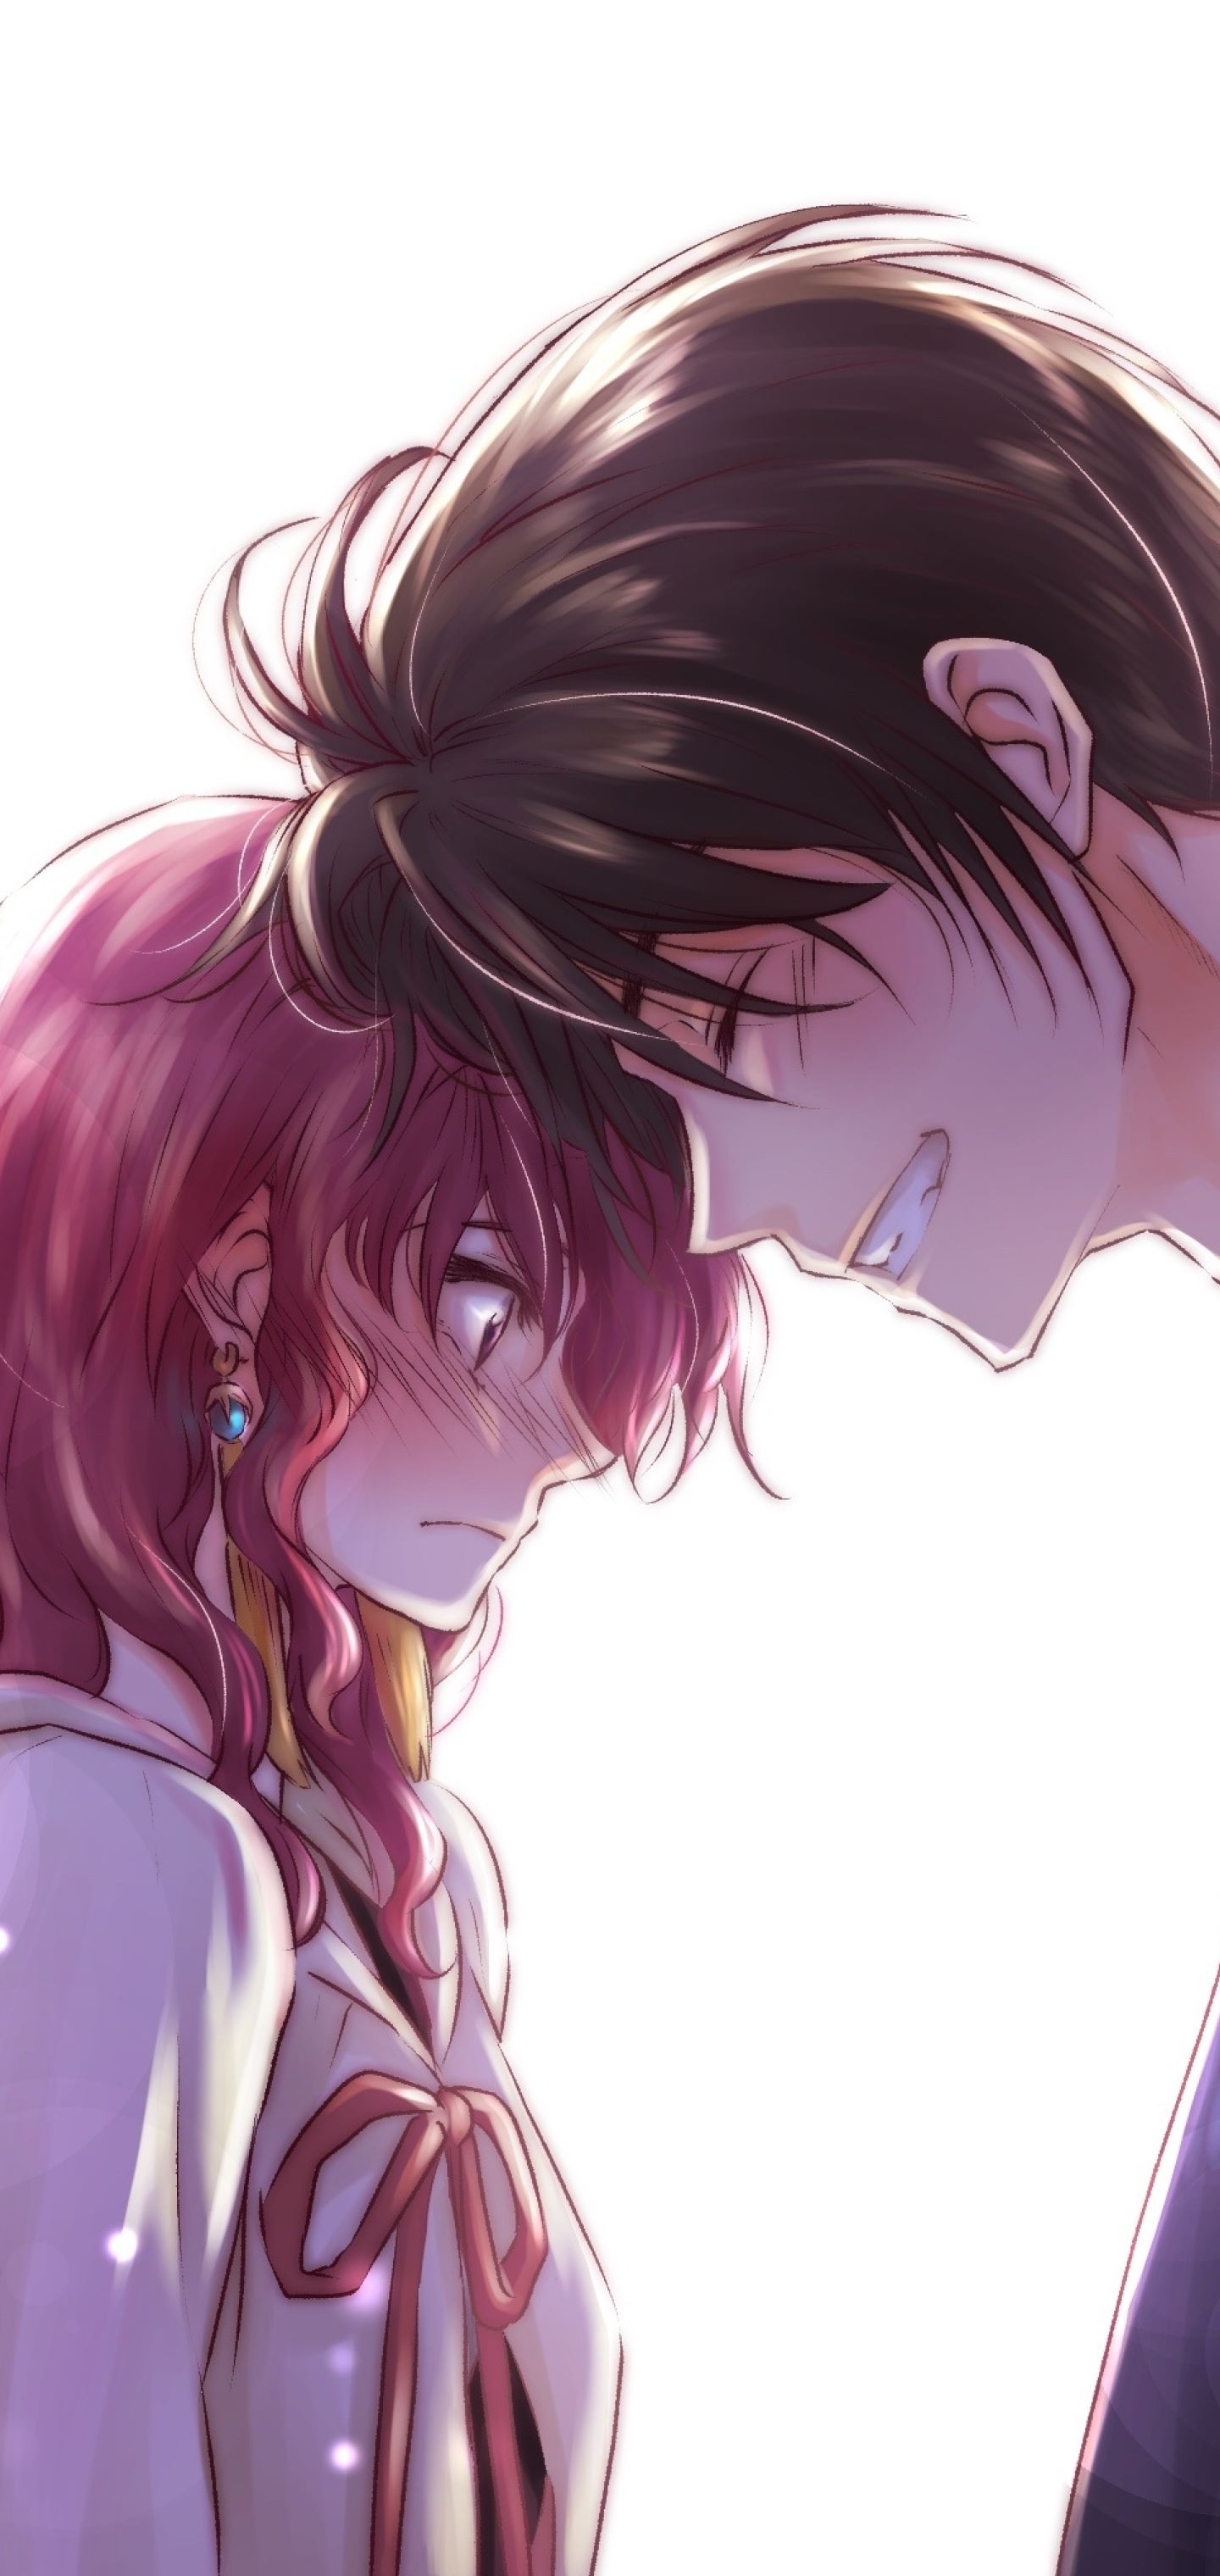 Download 1440x3040 Anime Yona of the Dawn 1440x3040 Resolution ...